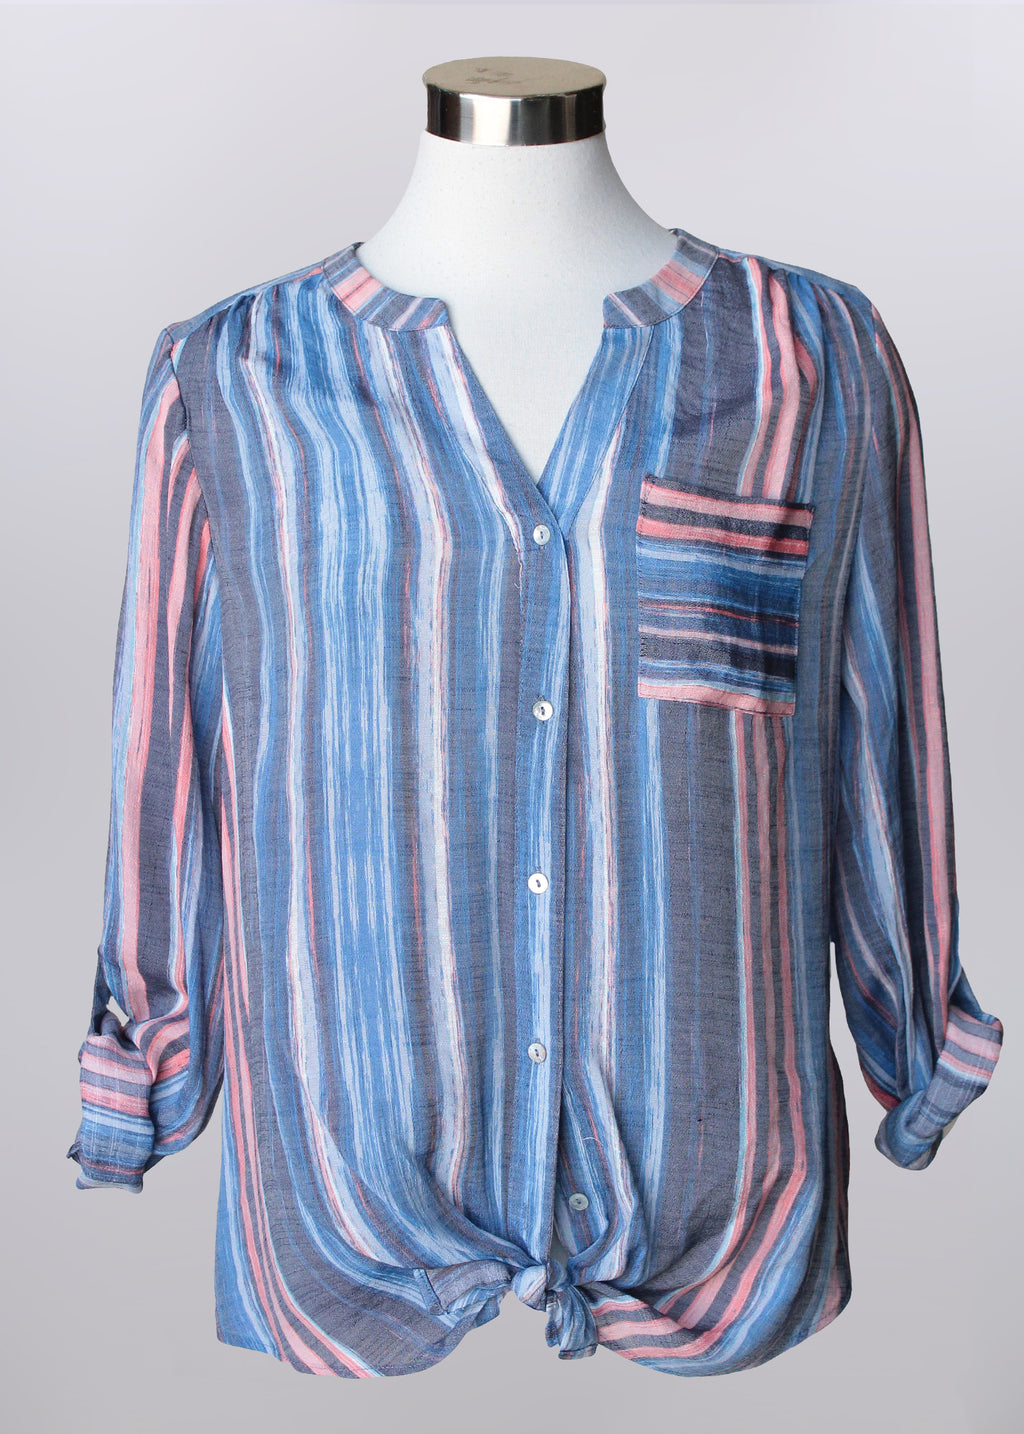 Horizontal Stripe Button Blouse | Light blue, grey, coral, pink and white painted stripe